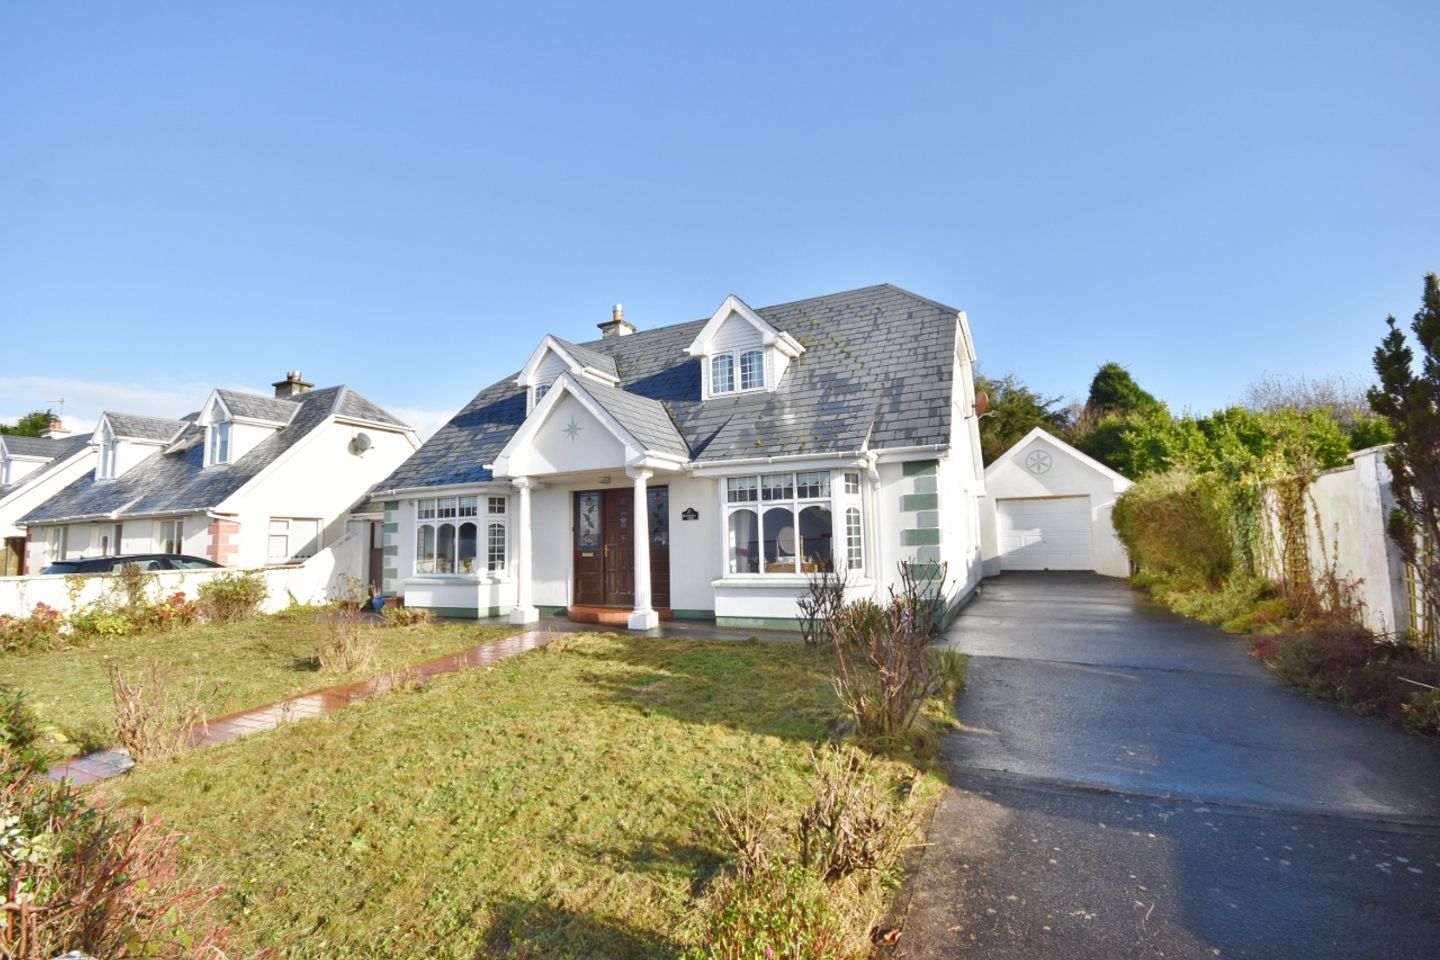 Downes View, 6 Clieveragh Downes, Listowel, Co. Kerry, V31XD21